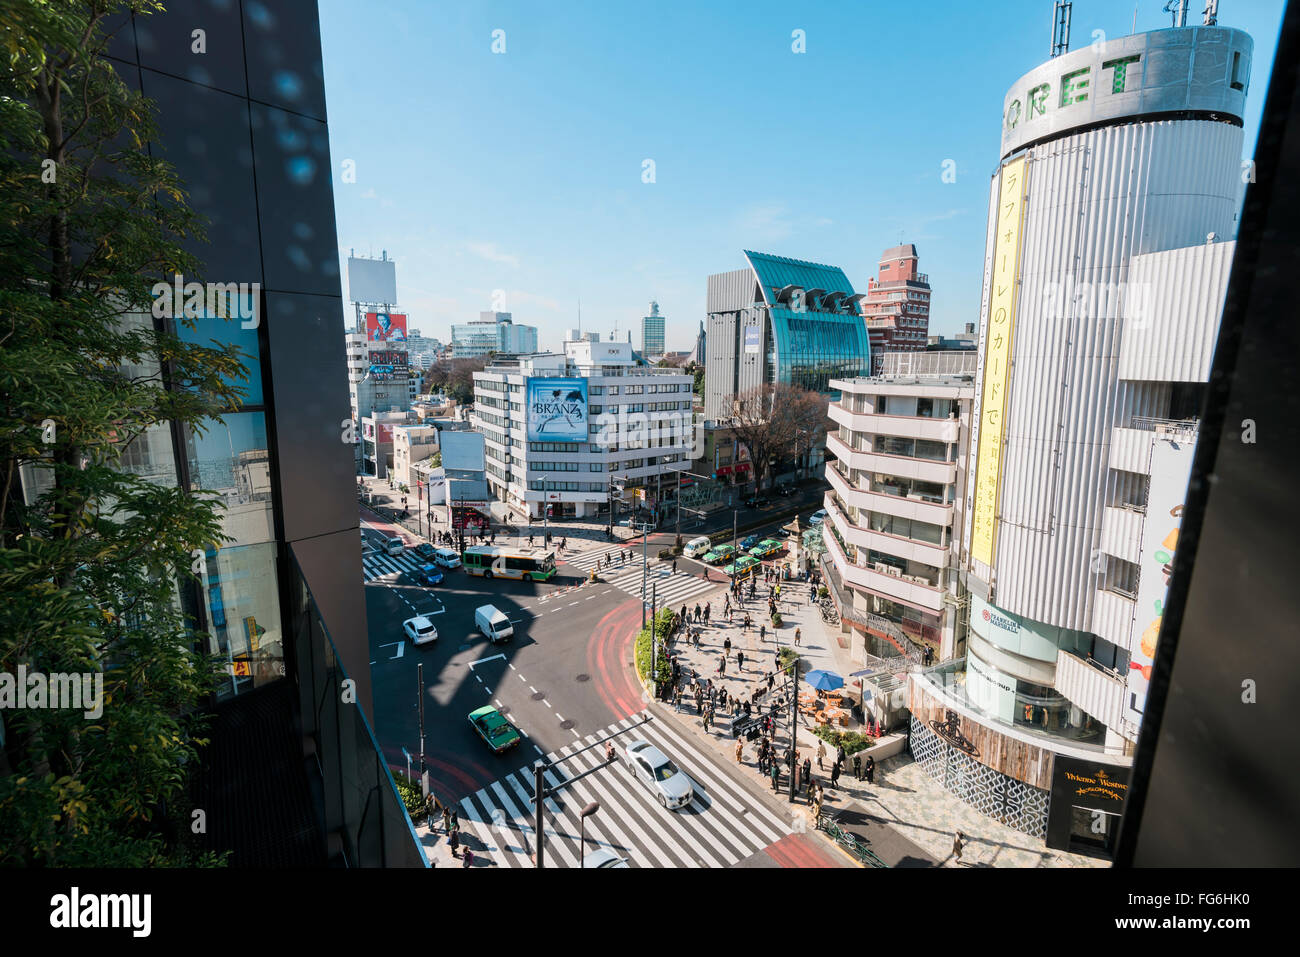 Tokyo, Japan - January 14, 2016:Aerial view of Omotesando district. Omotesandō is known as one of the foremost 'architectural sh Stock Photo